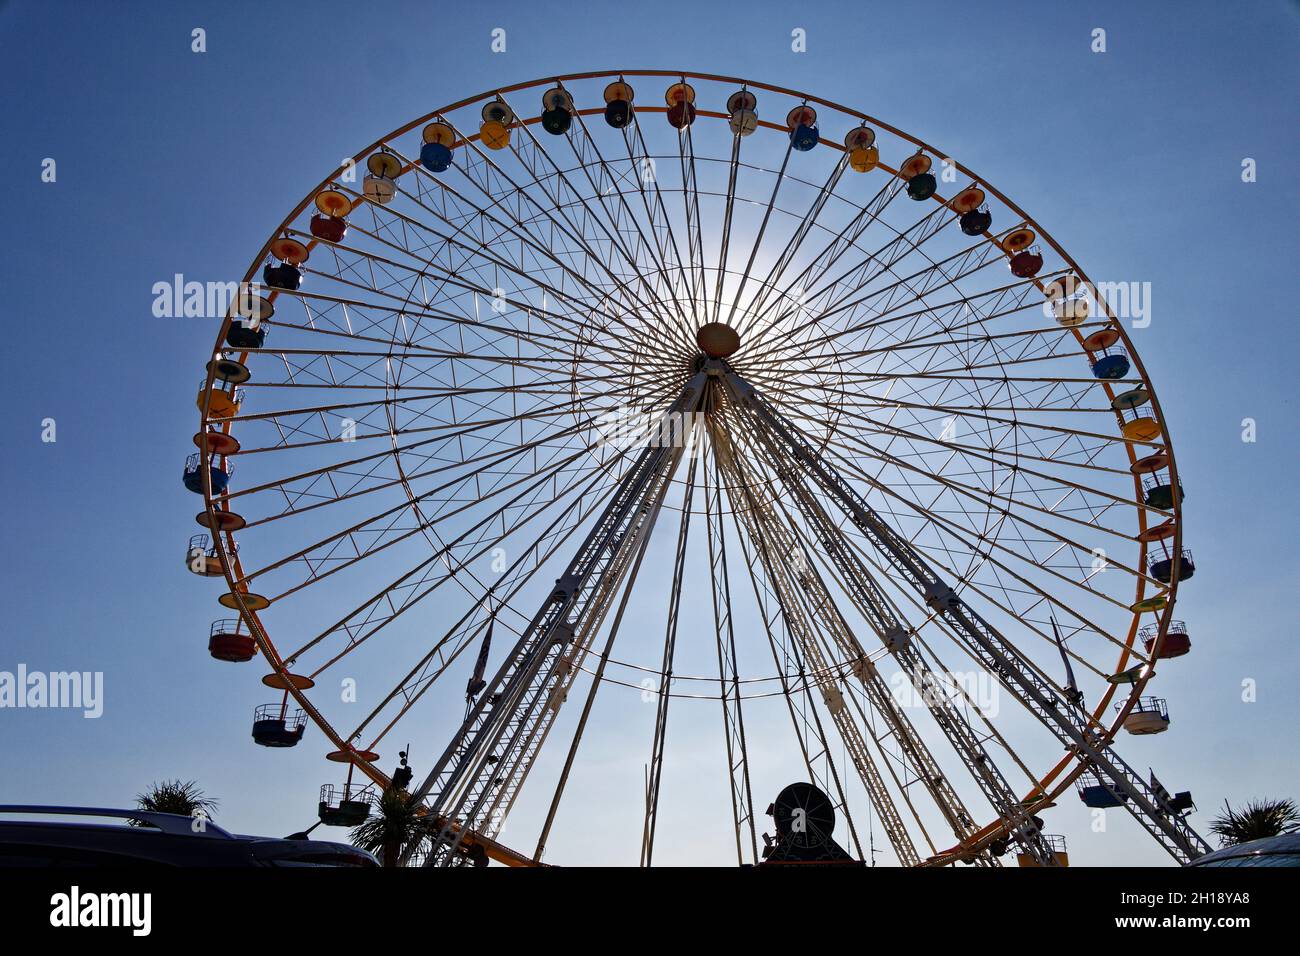 Le Barcares, France. 31th Aug, 2021. Ferris wheel at the port of Le Barcarès on August 31, 2021. Stock Photo